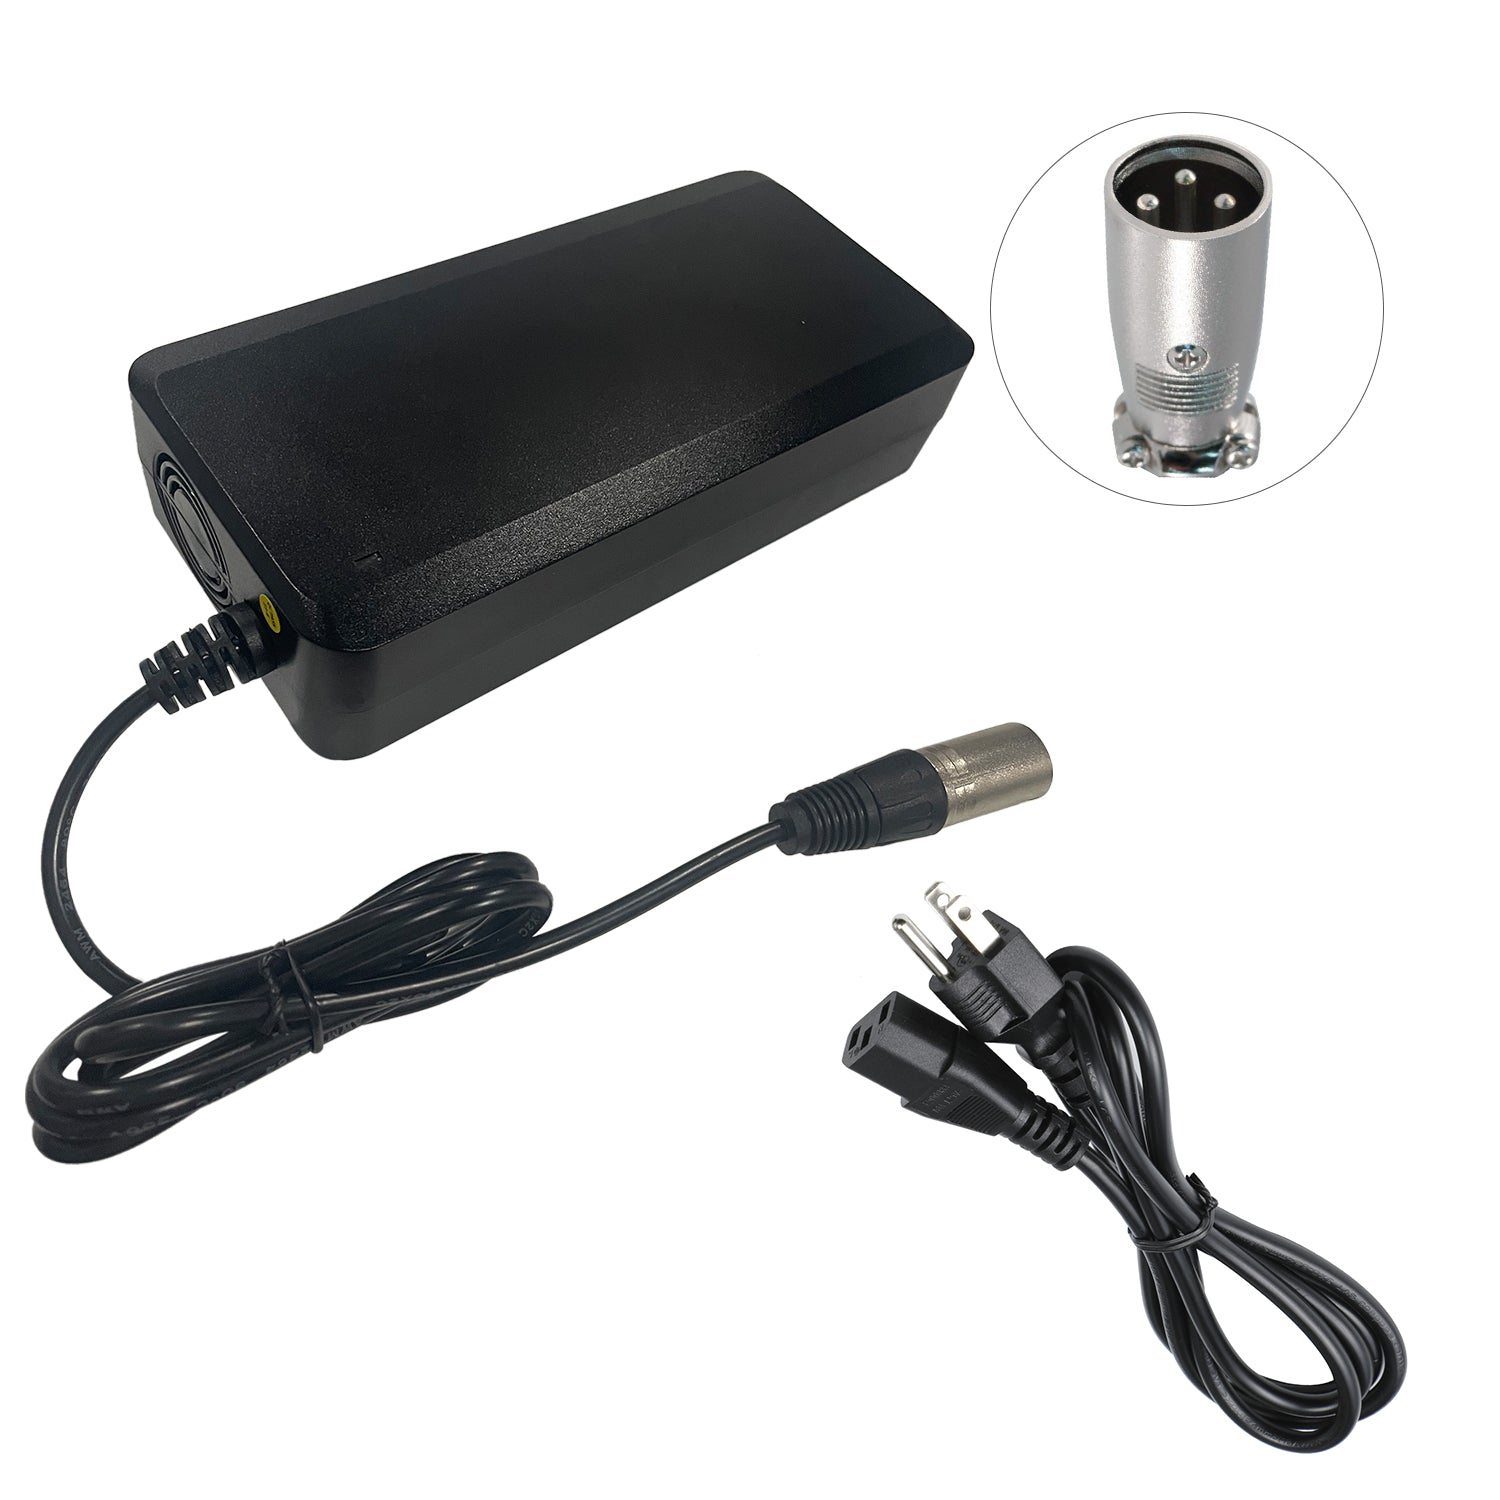 UL Listed 24V 8A Charger for Shoprider Series Scooters